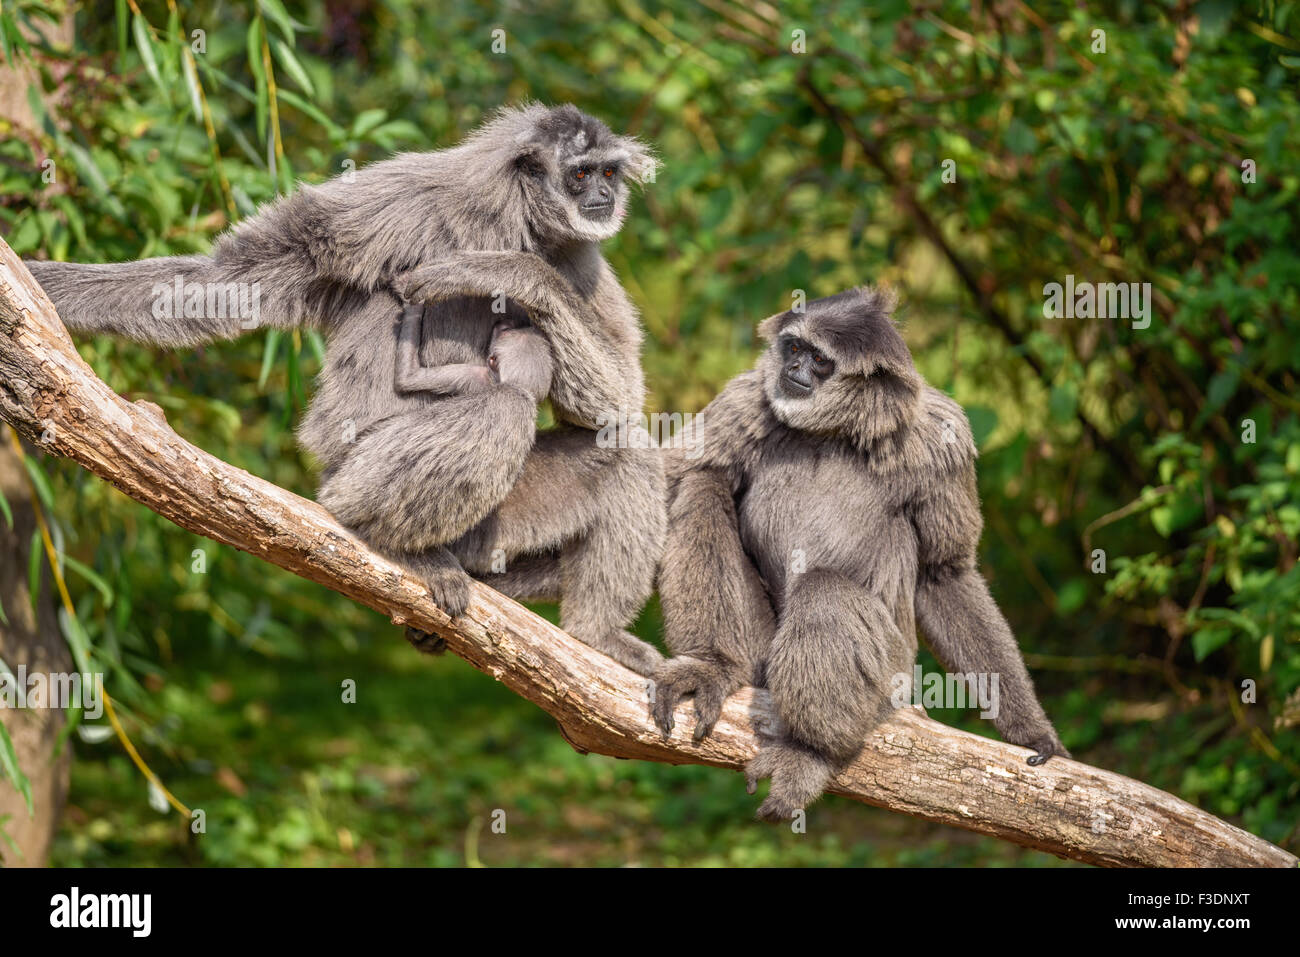 Family of silvery gibbons (Hylobates moloch) with a newborn. The silvery gibbon ranks among the most threatened species. Stock Photo